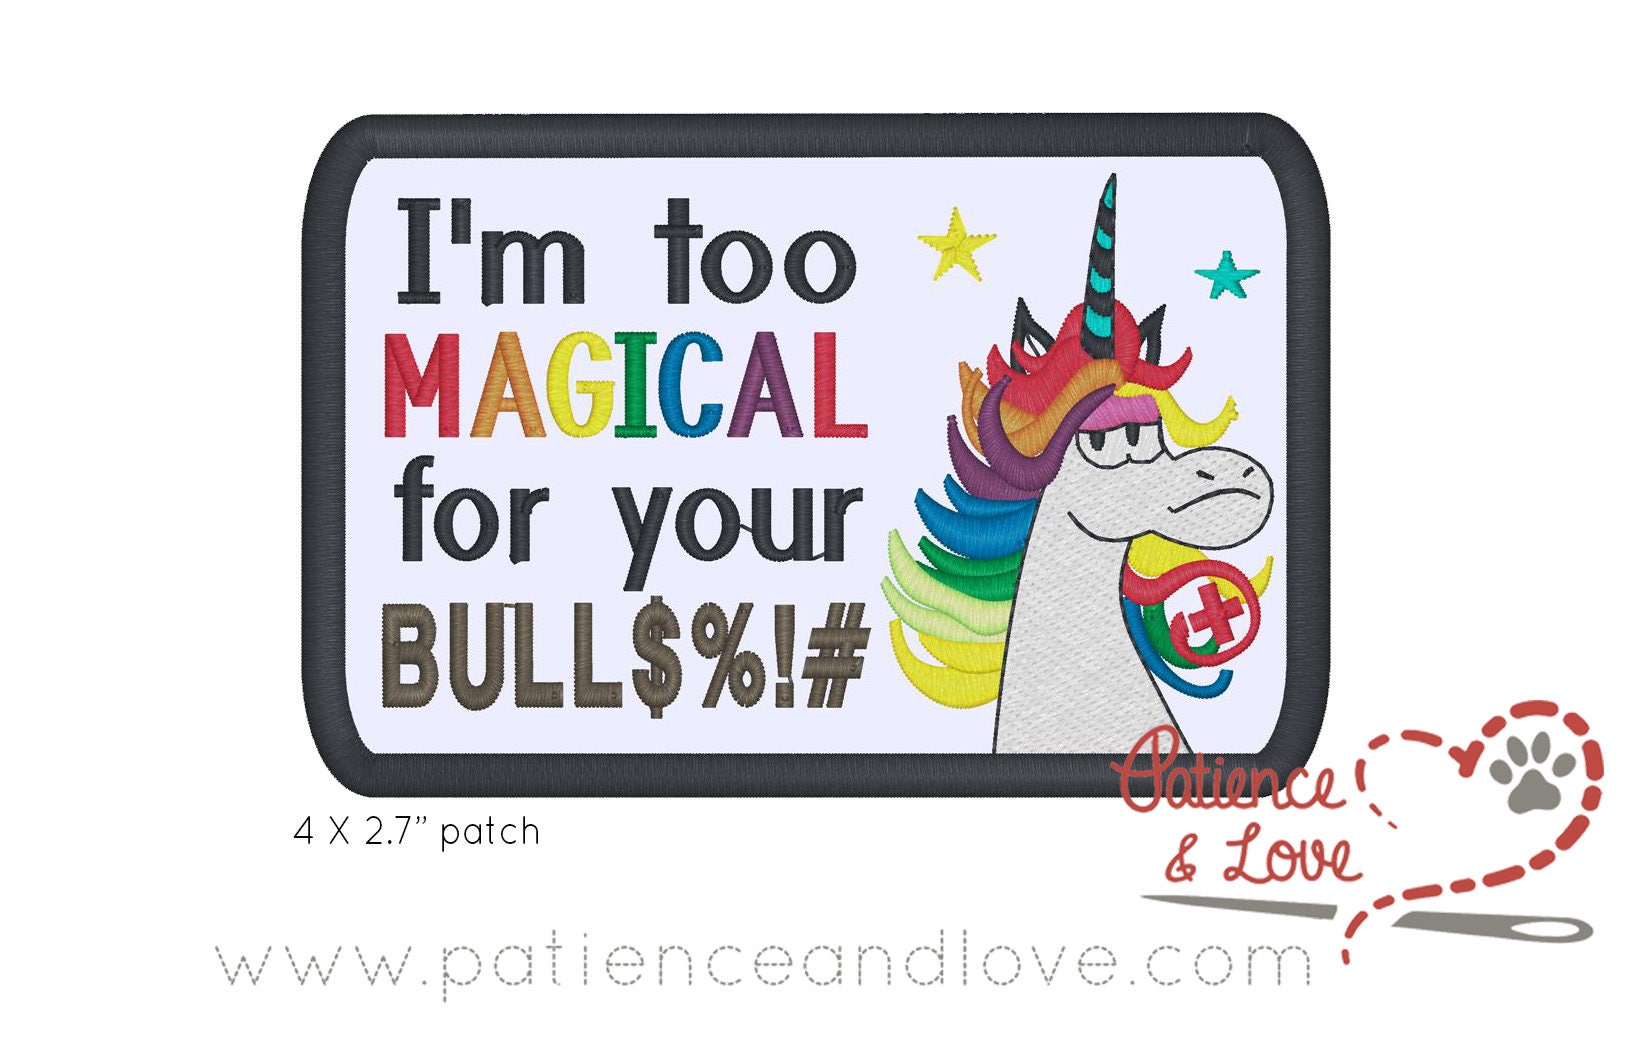 One sew on patch embroidered with the following:  I'm too MAGICAL  for your BULL$%!#. A unicorn with rainbow hair to the right of the text.   As seen in the listing photo. The listing photo shows white fabric, Black and rainbow text and a black edge.